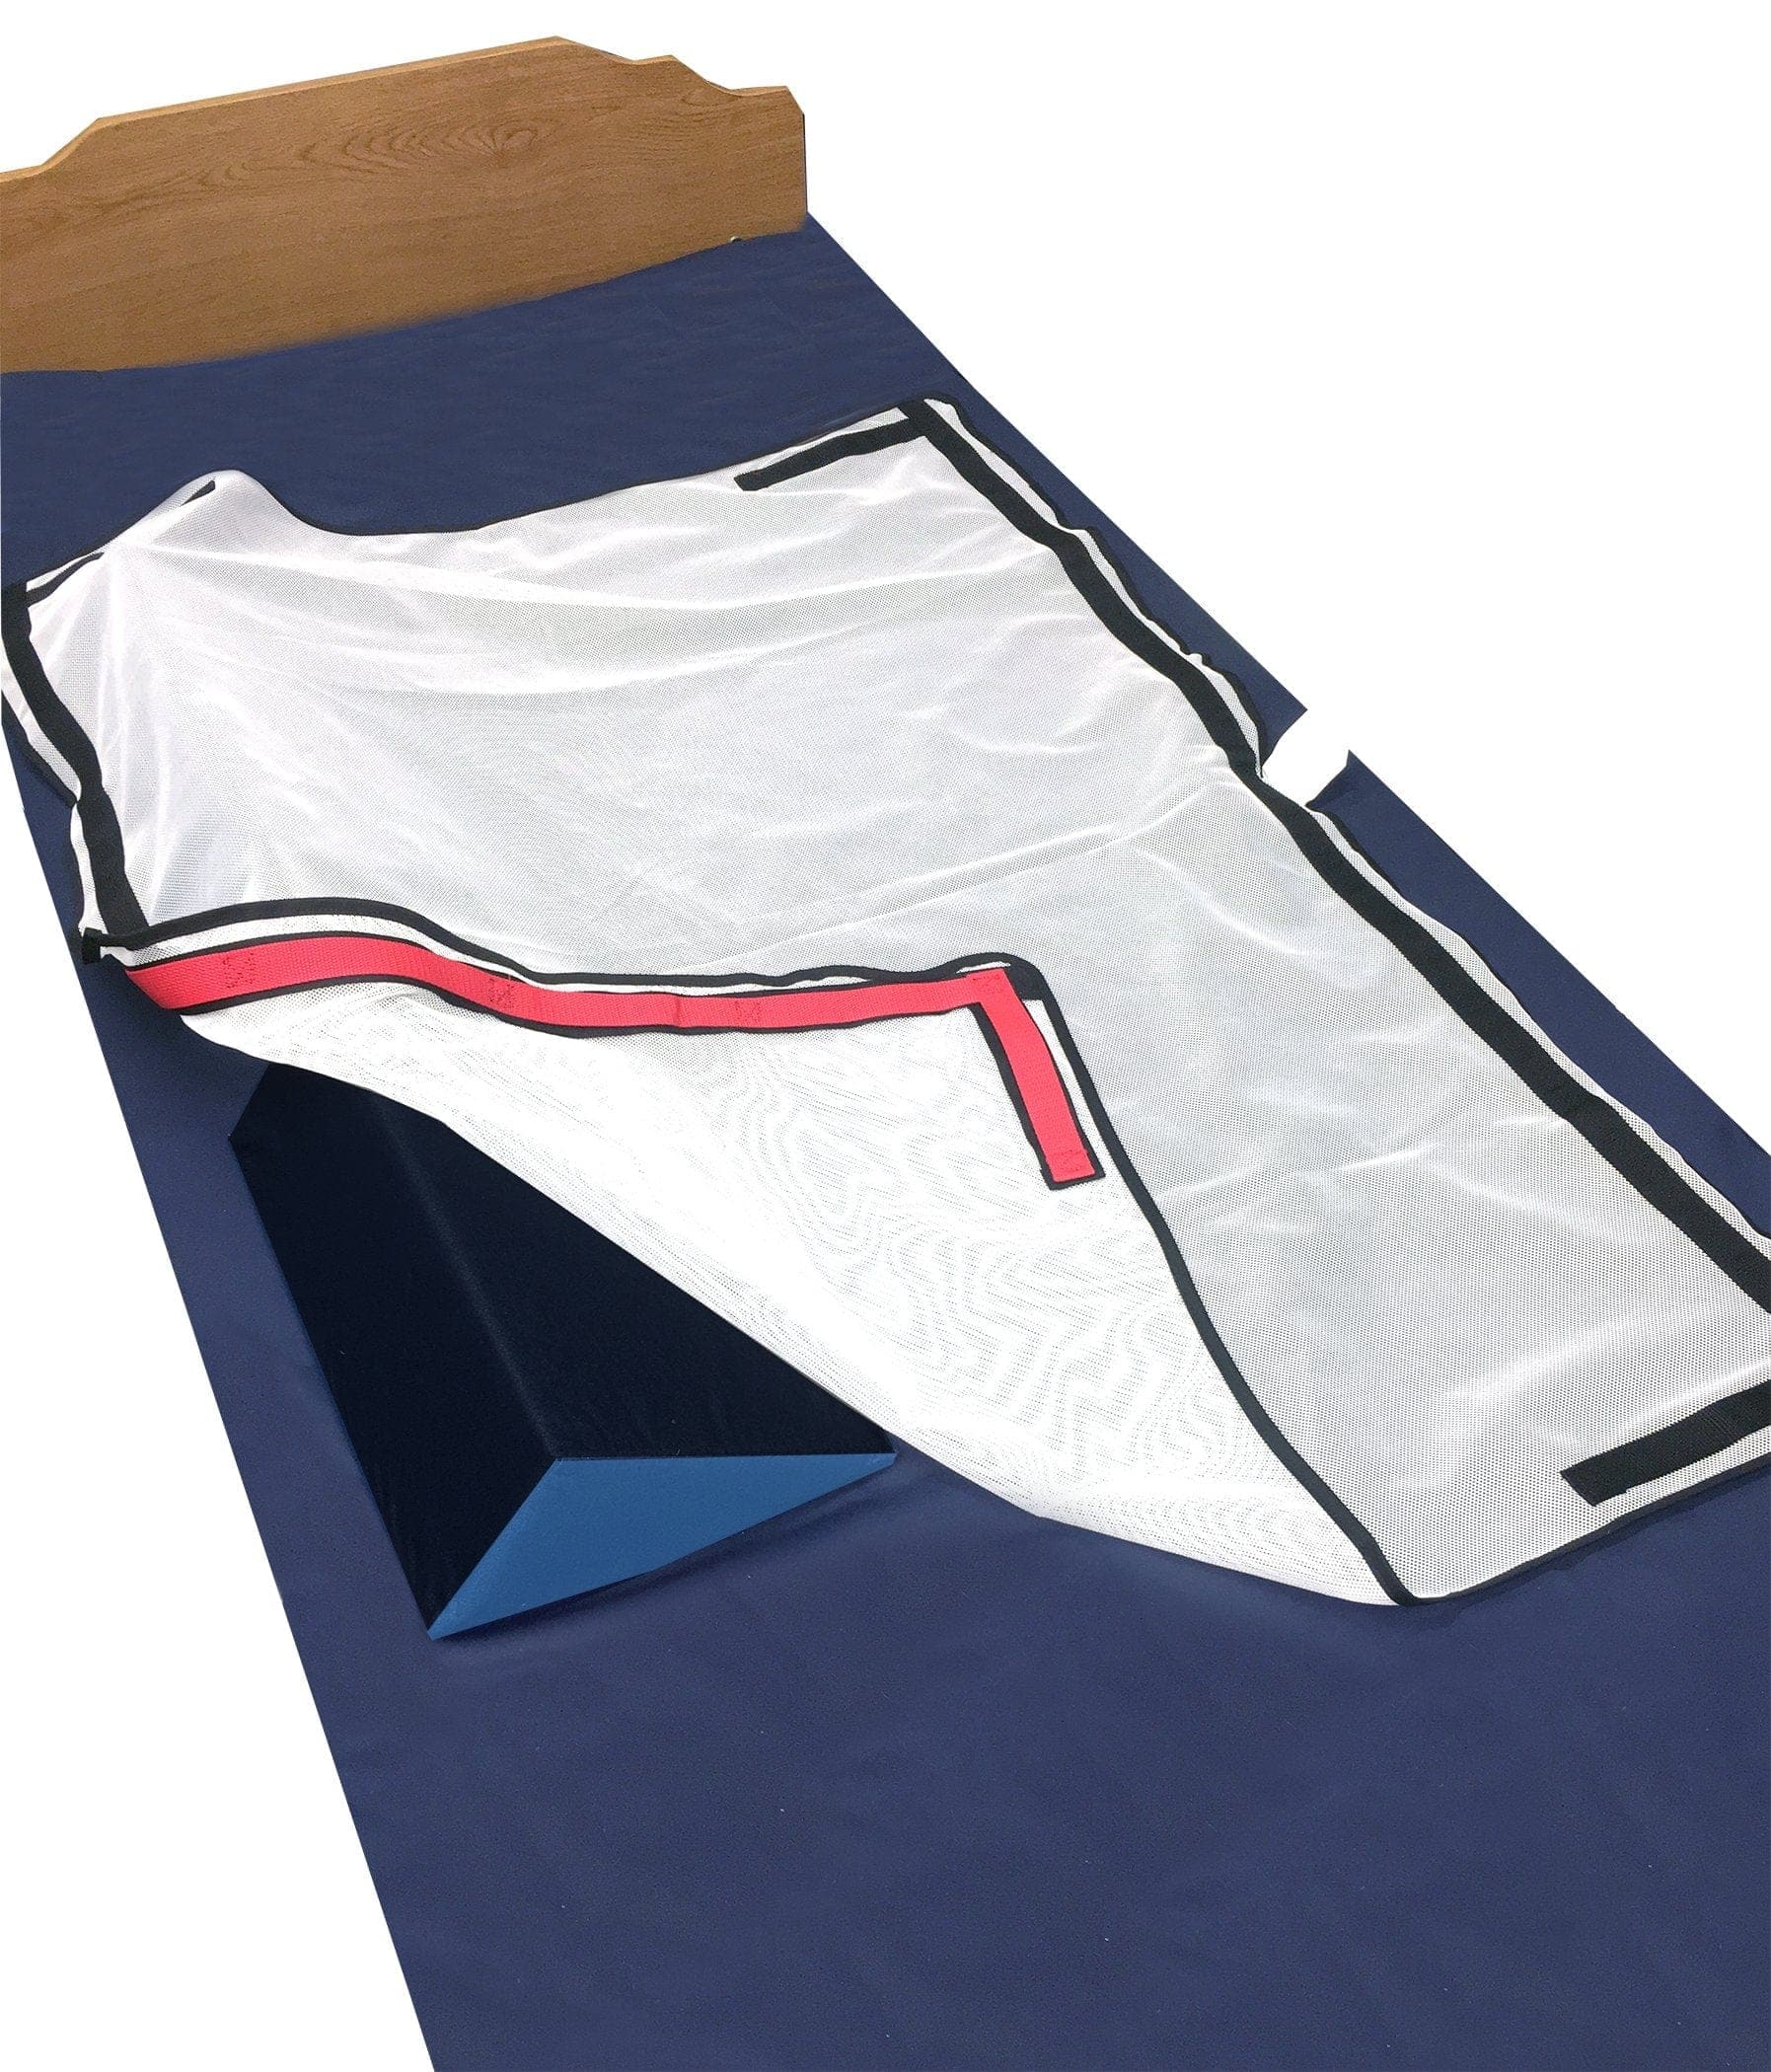 SkilCare Bed Positioning 1 Set SkilCare Bed Positioning System, 50" x 38" Mesh Sheet and Two 30 Degree 16" Wedges